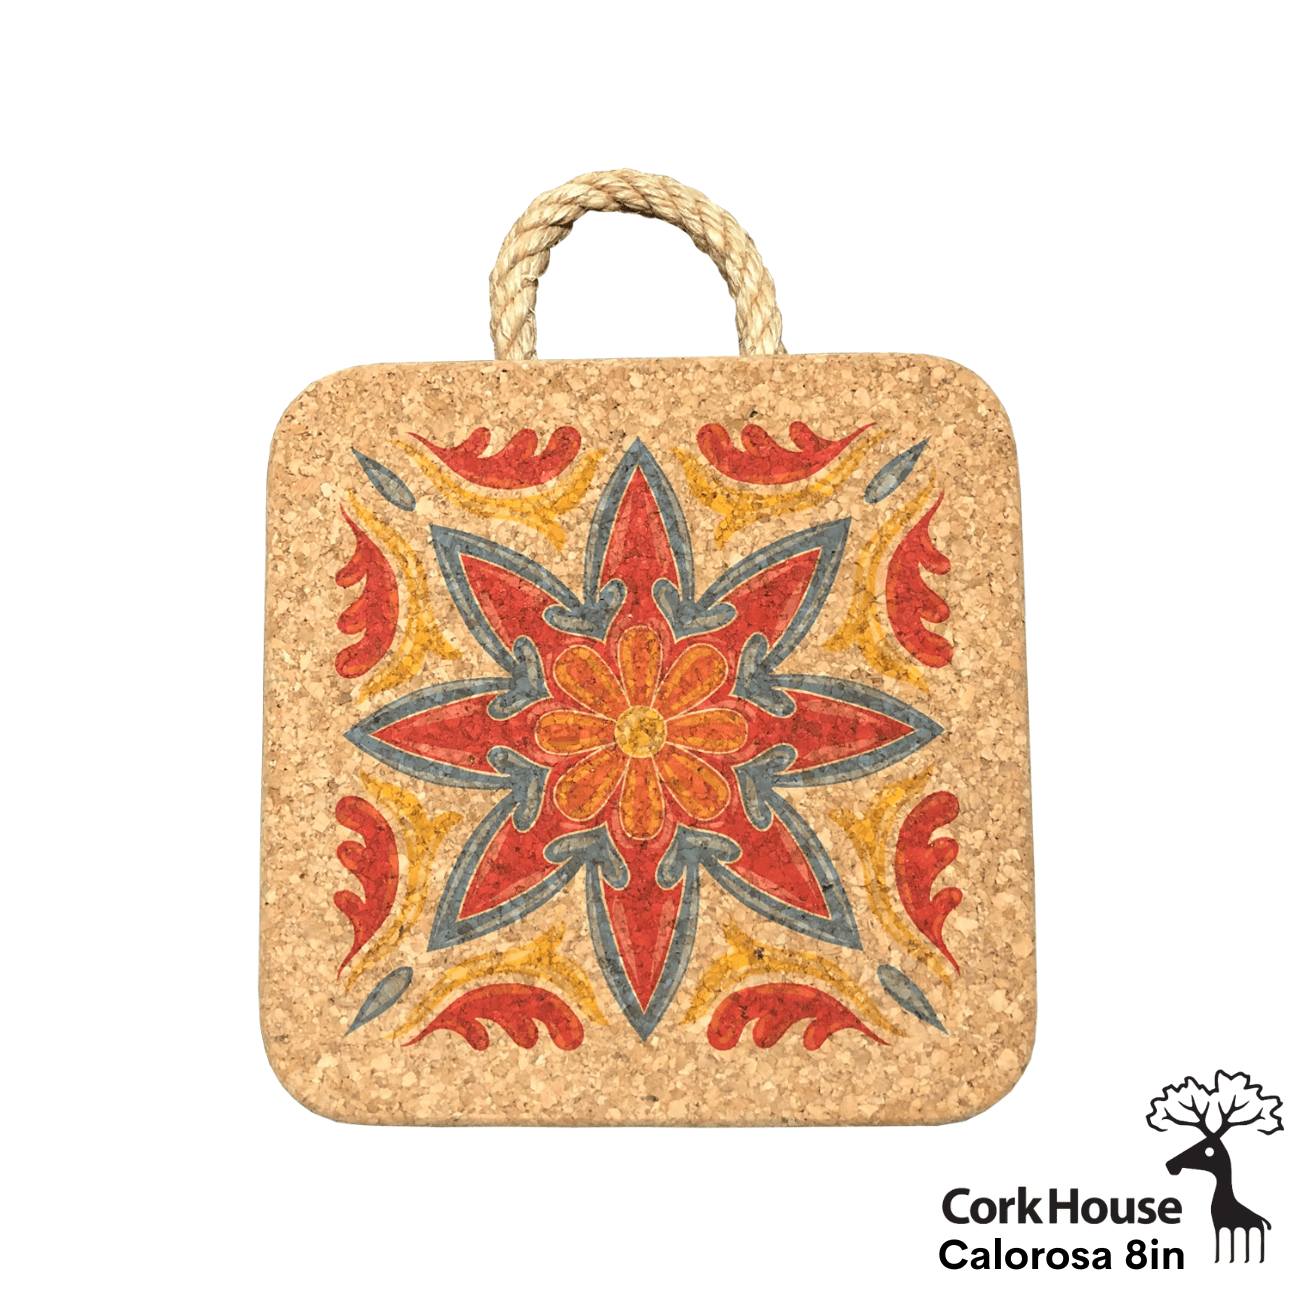 The 8in calorosa hot pad has the same printed tile pattern as the 6in with a large band of unprinted cork around the edge.